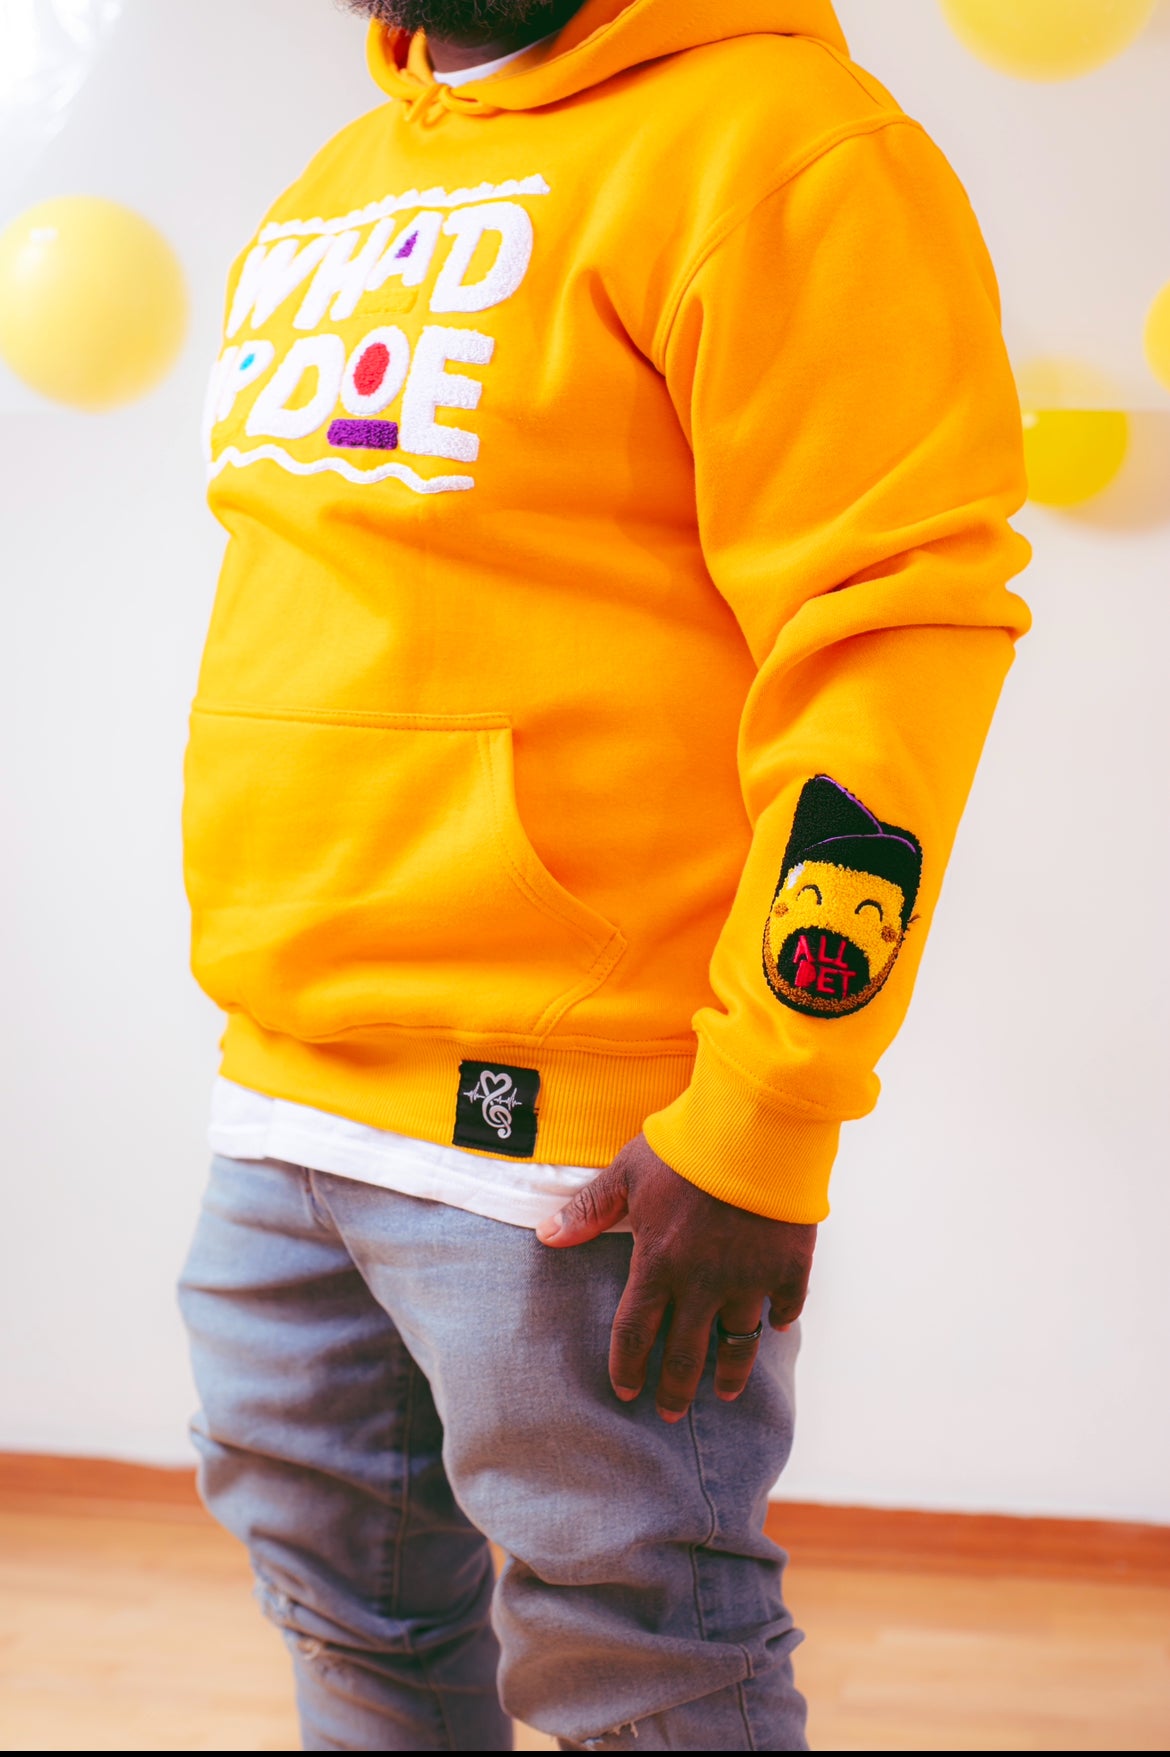 "Whad Up Doe" Gold Chenille Hoodie